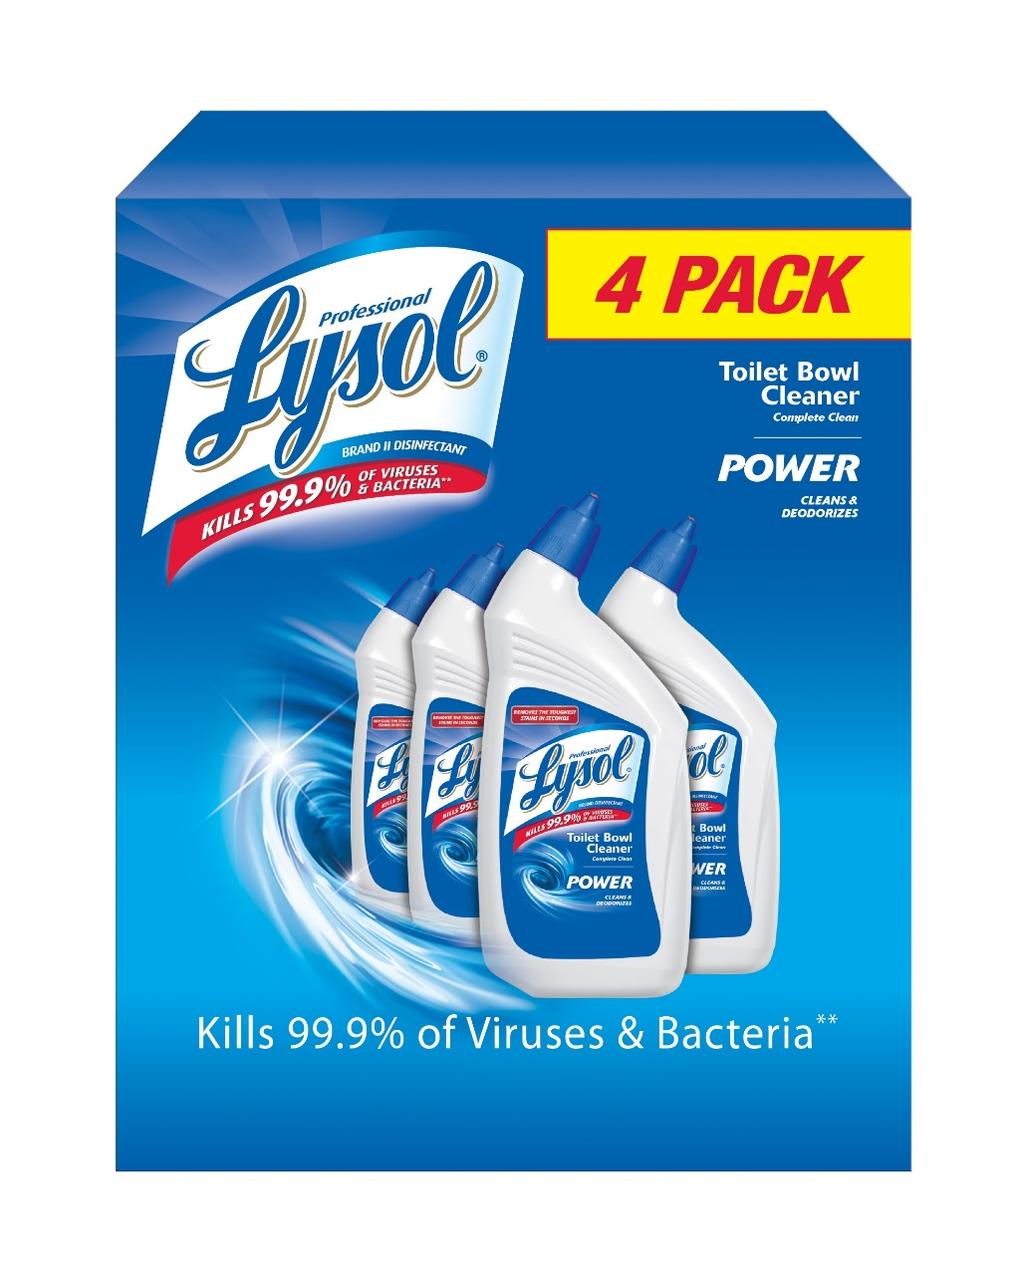 Professional LYSOL Power Toilet Bowl Cleaner 4 Pack! Effective against Staphylococcus, Pseudomonas, E.